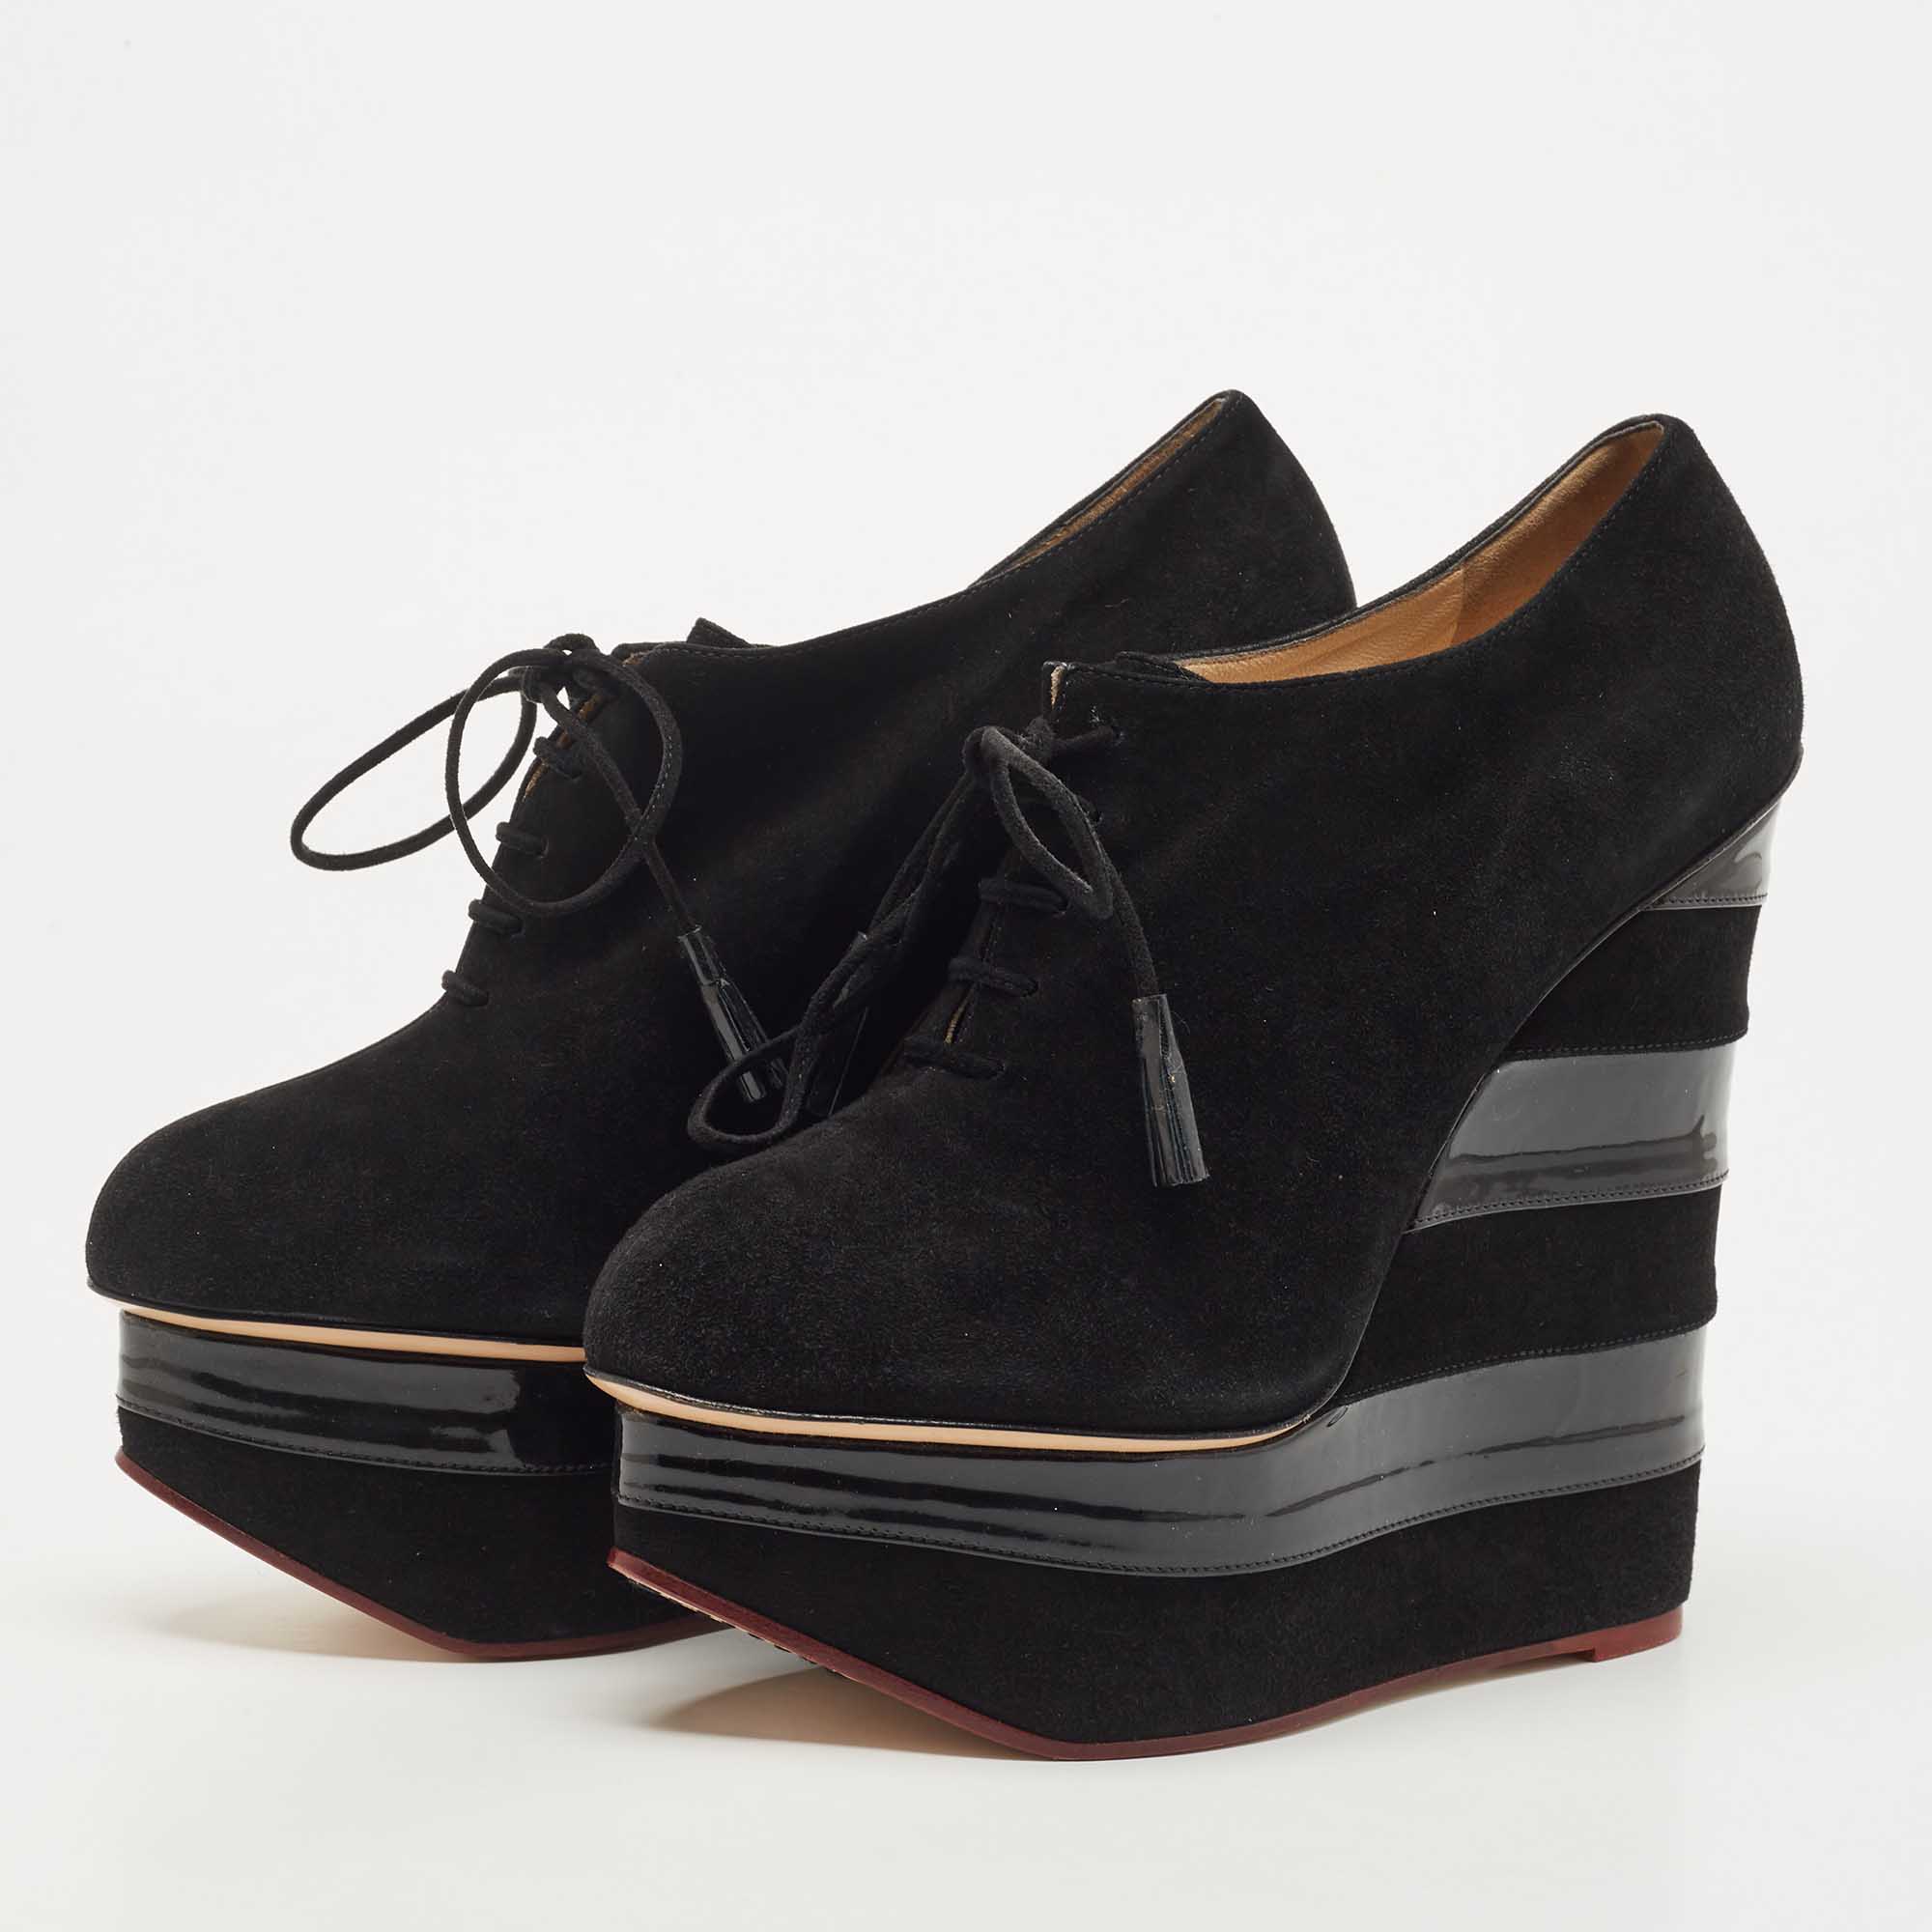 

Charlotte Olympia Black Suede Wedge Platform Lace Up Ankle Booties Size